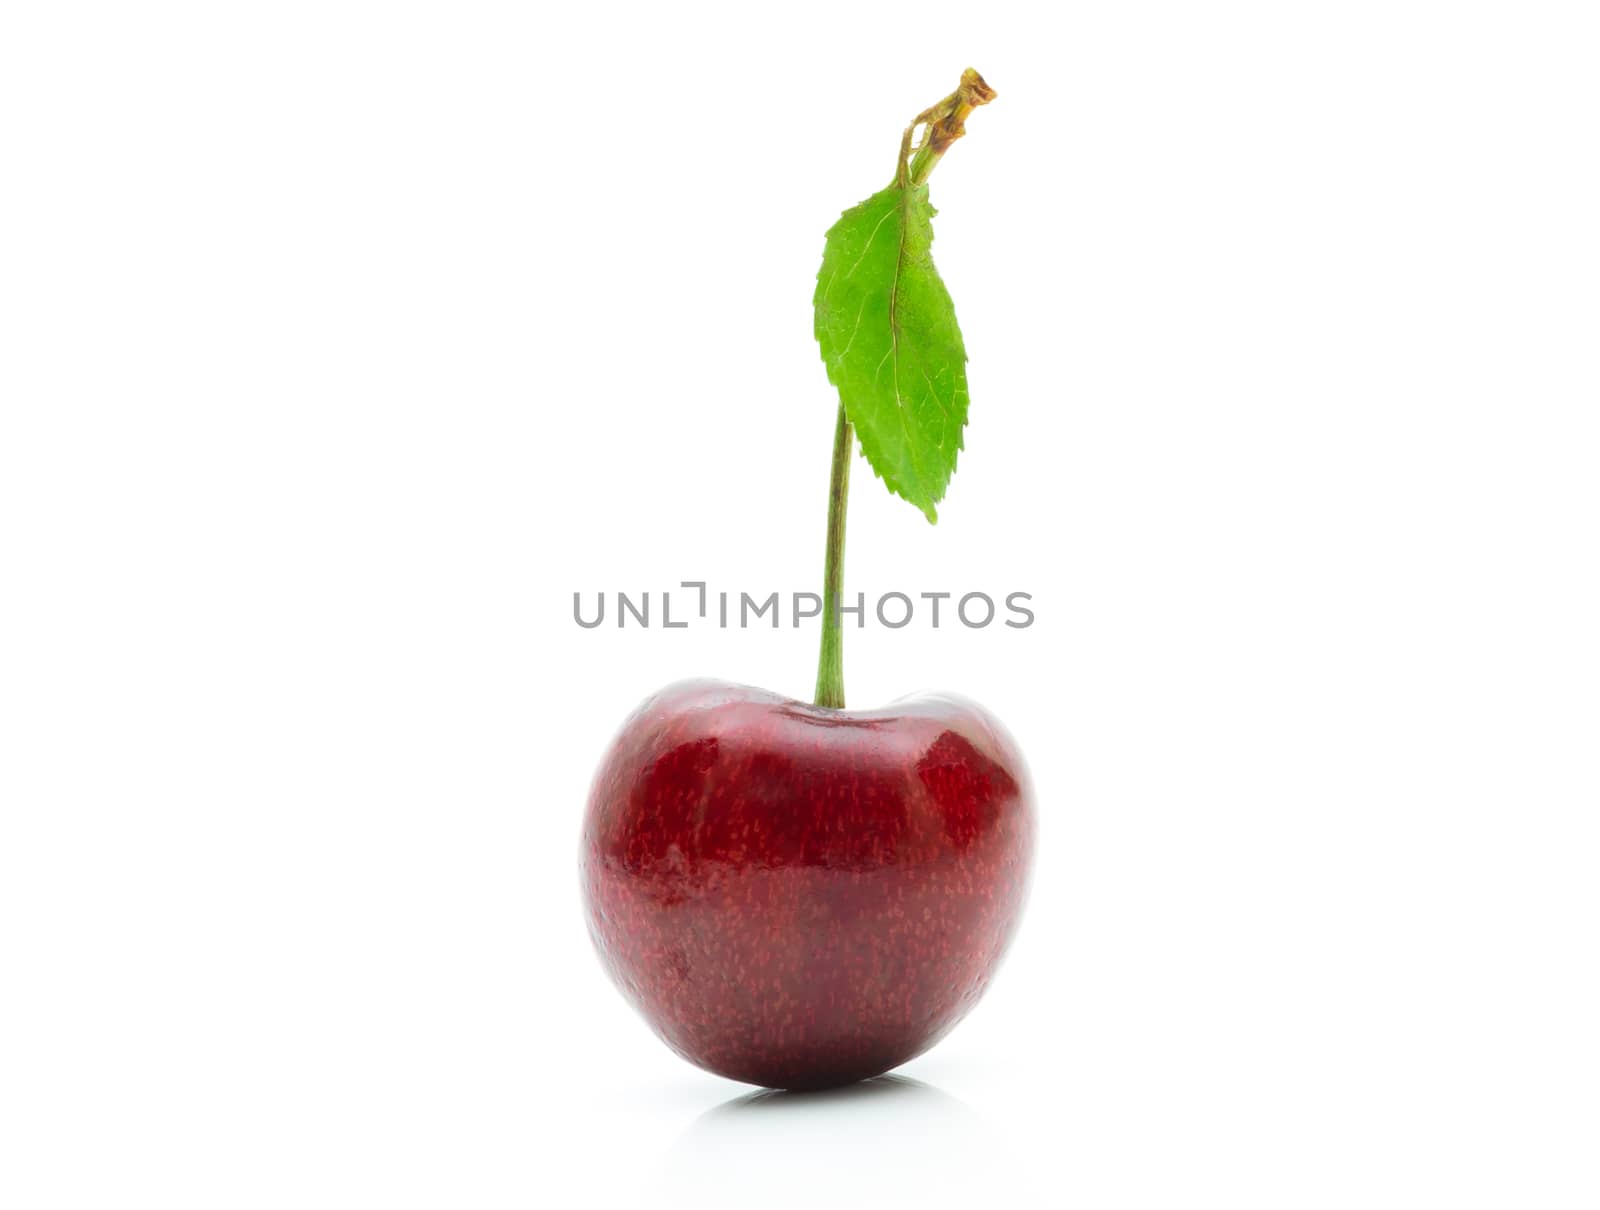 Cherry fruit on a white background